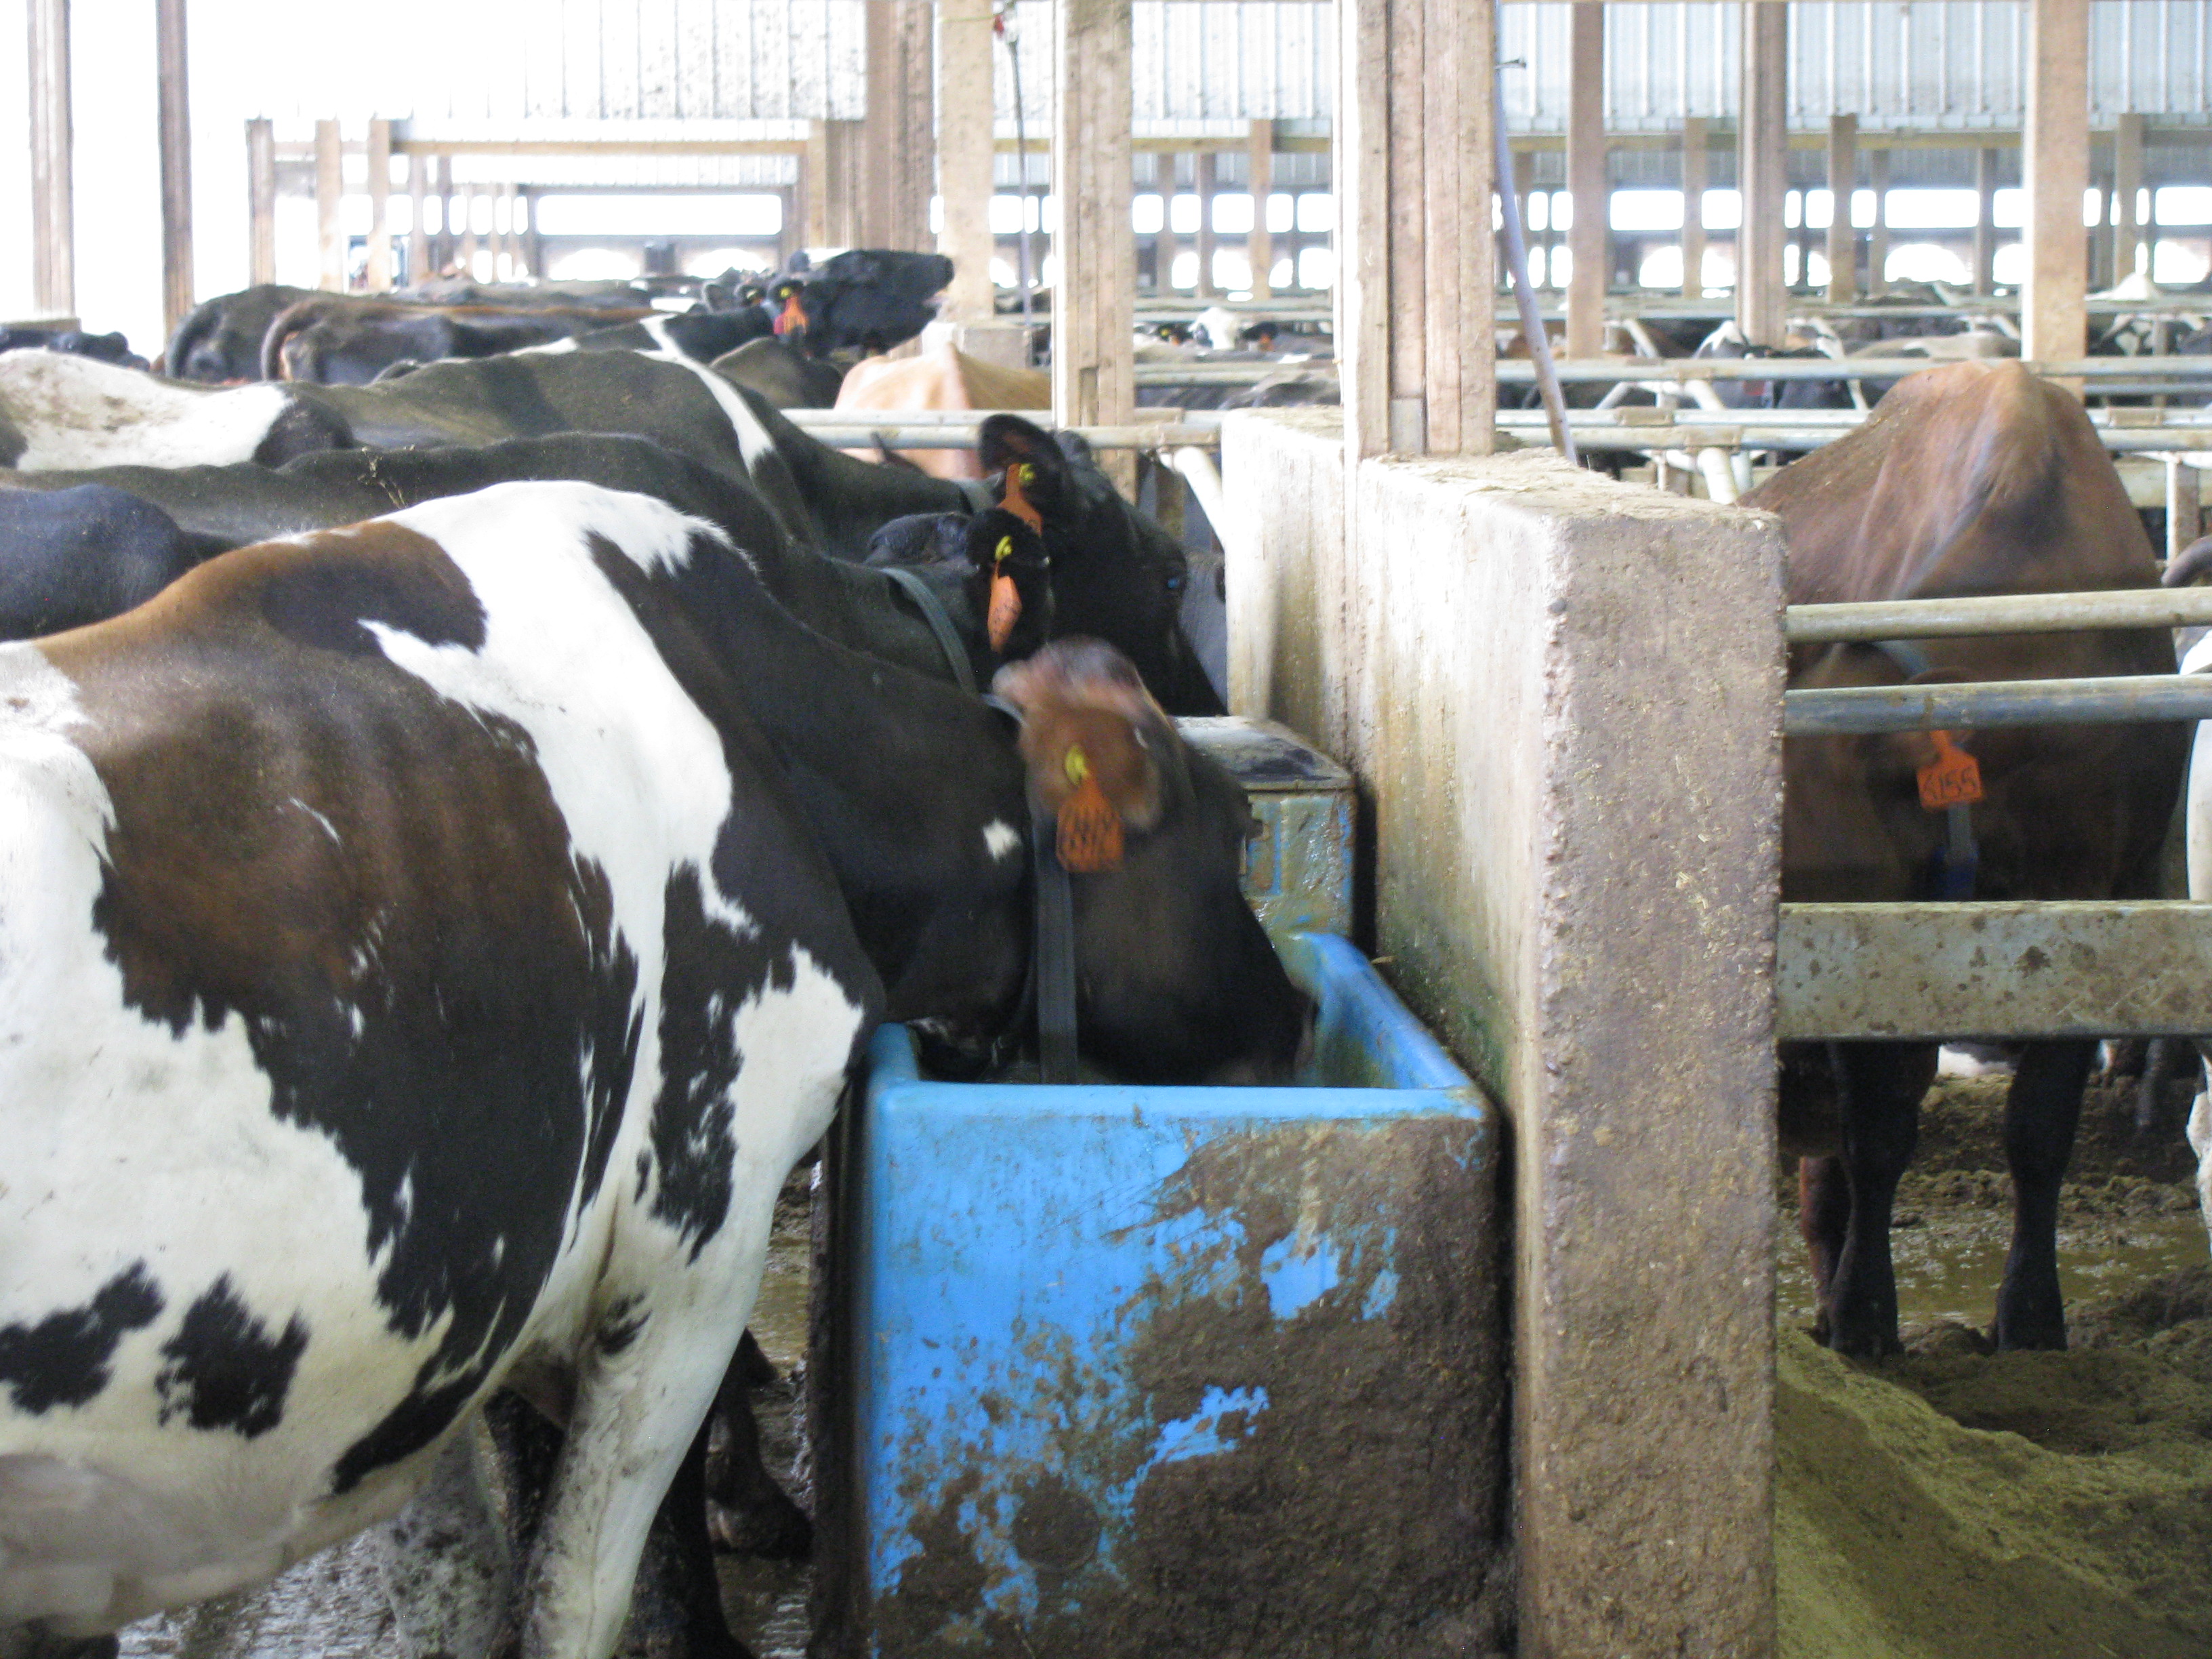 Group of black and white, spotted dairy cattle drinking from a water trough.